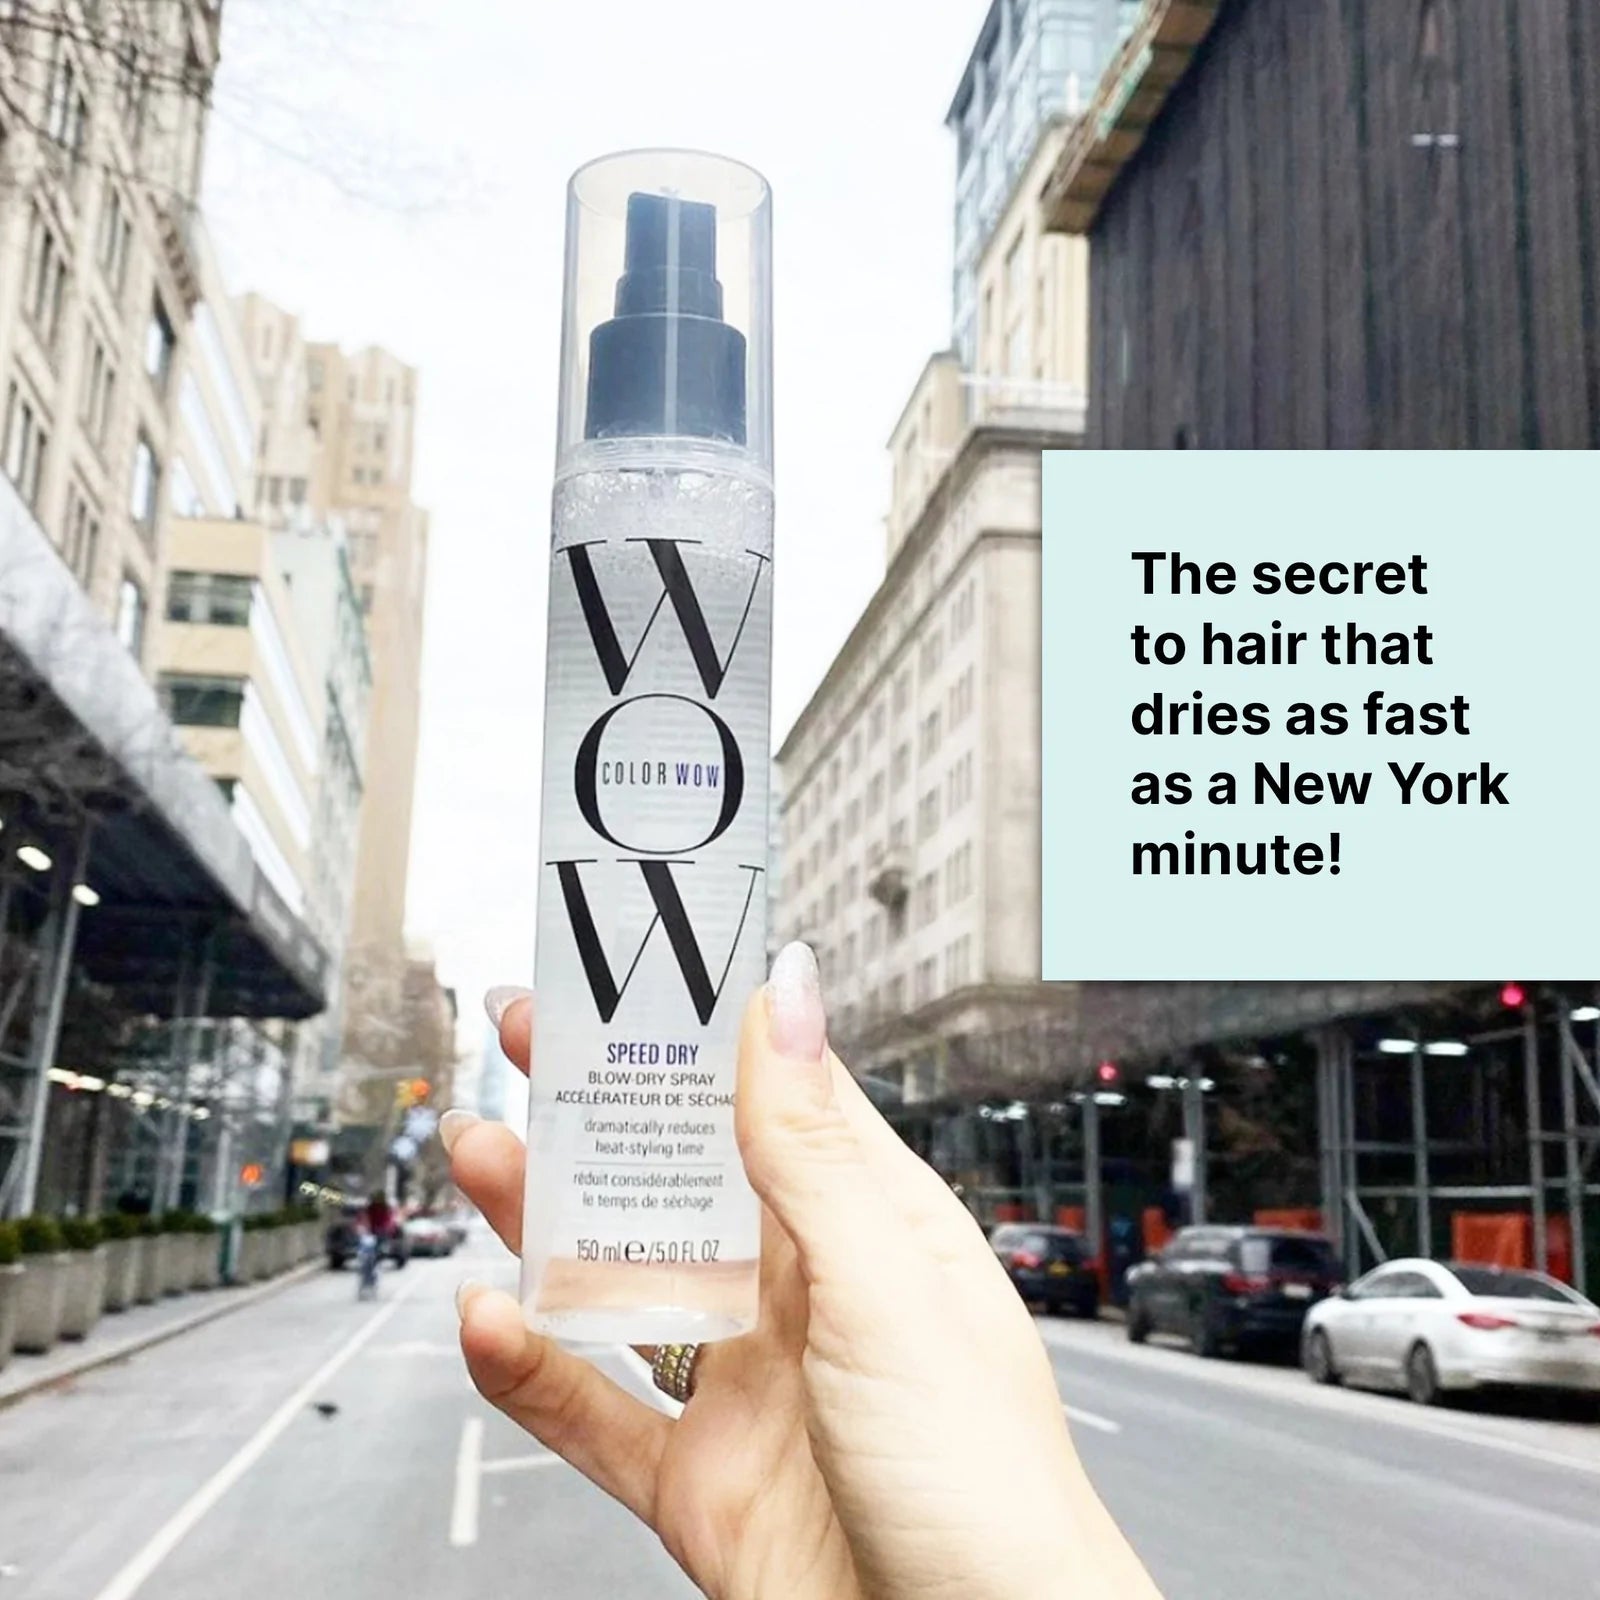 Color Wow Speed Dry Blow-Dry Spray, the secret for hair that dies fast as a New York minute